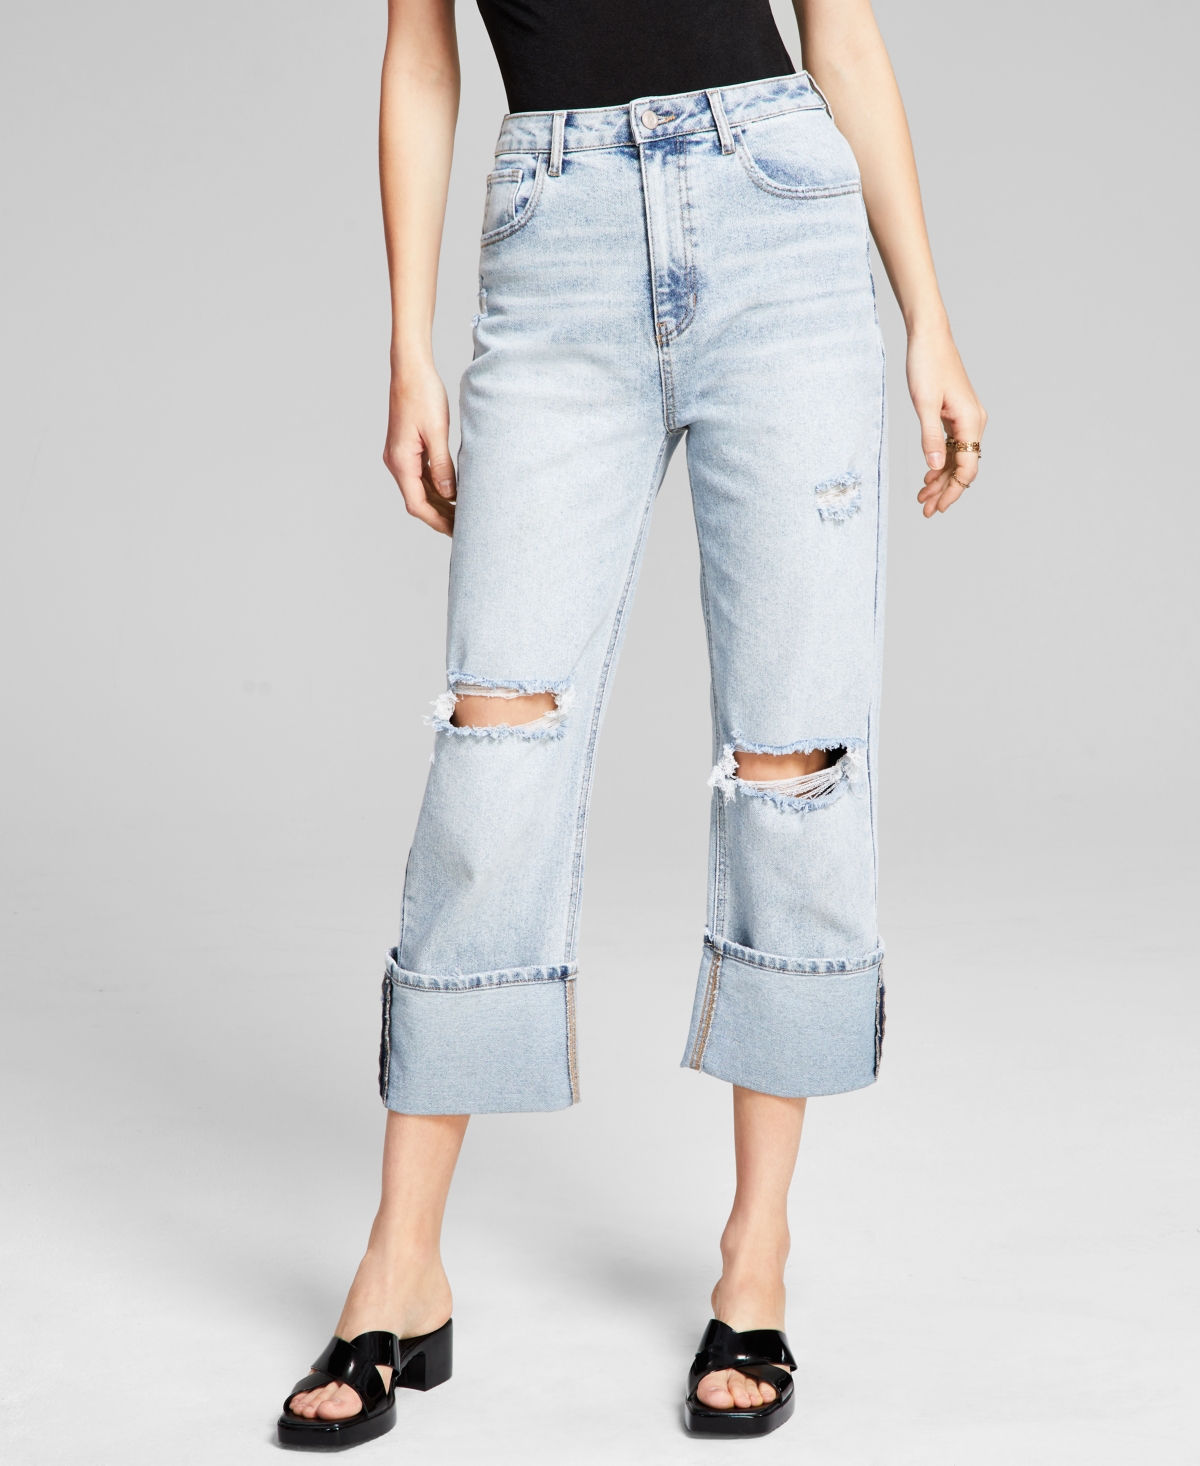  And Now This Women's High-Rise Straight-Leg Cuffed Jeans